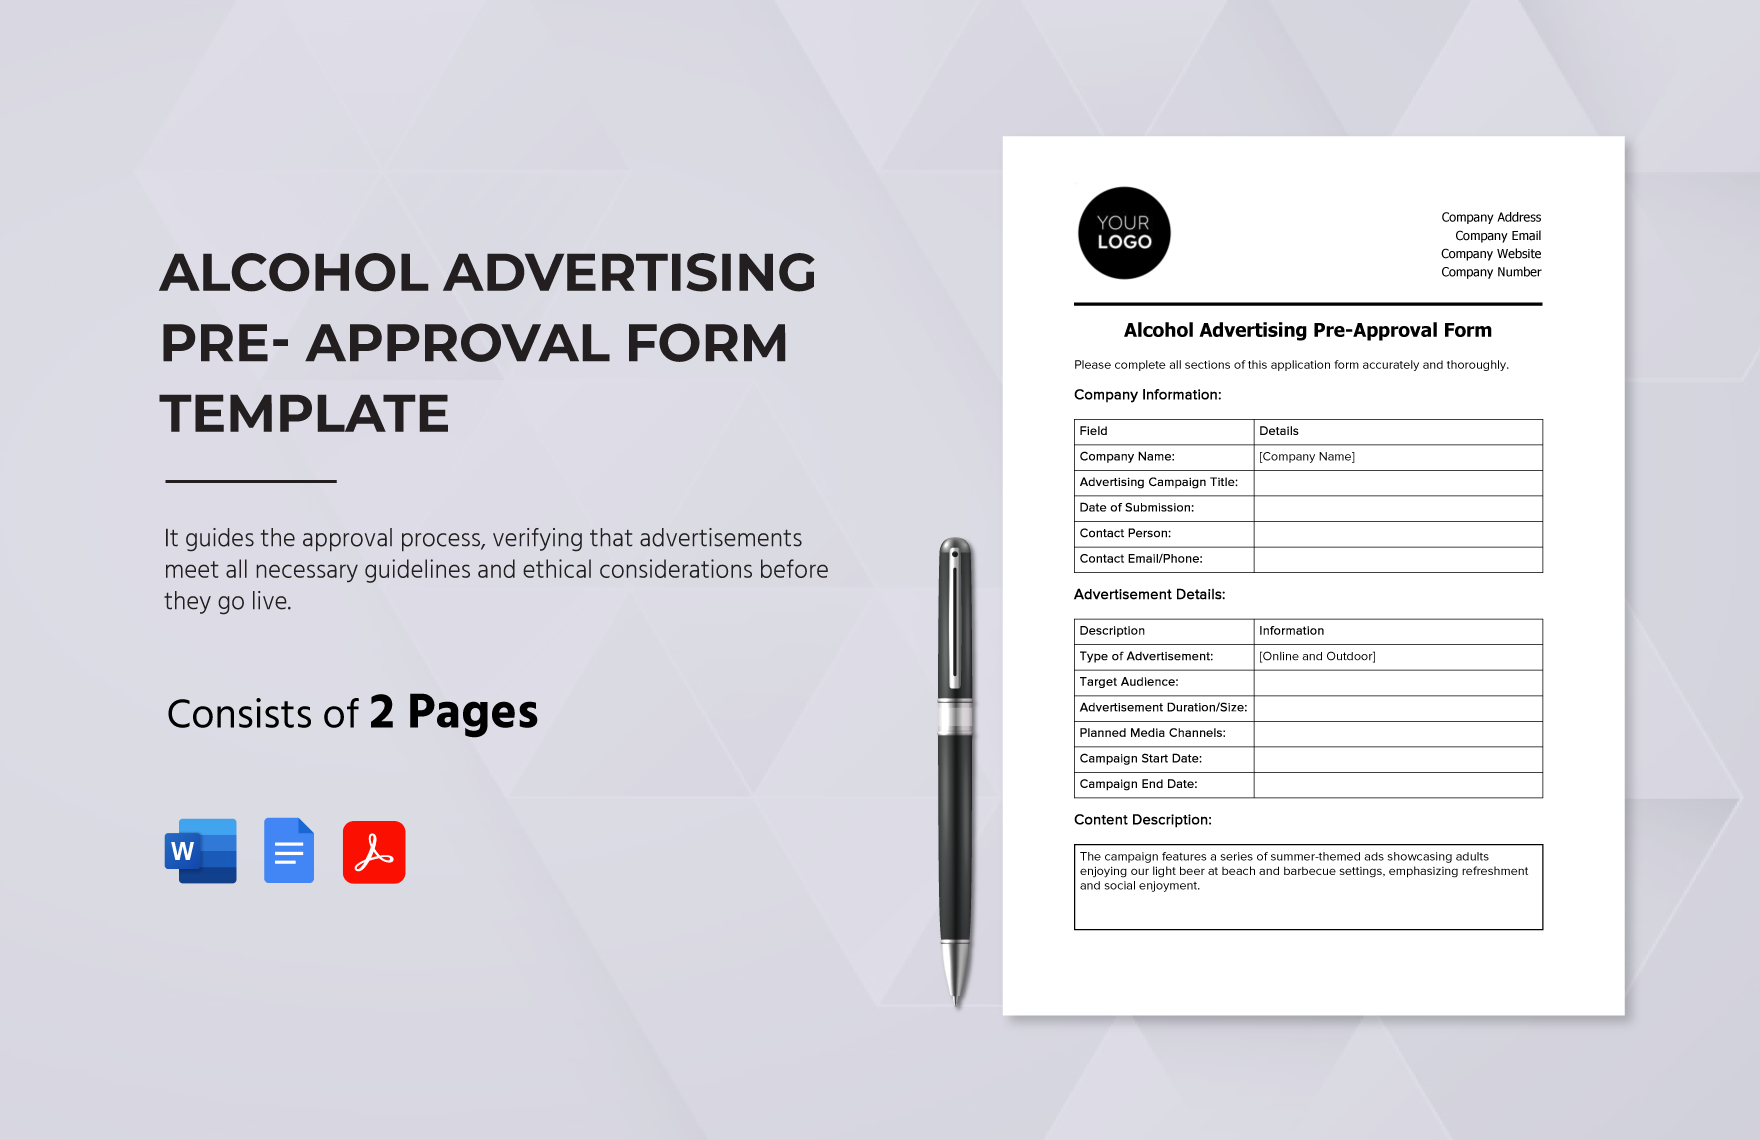 Alcohol Advertising Pre-Approval Form Template